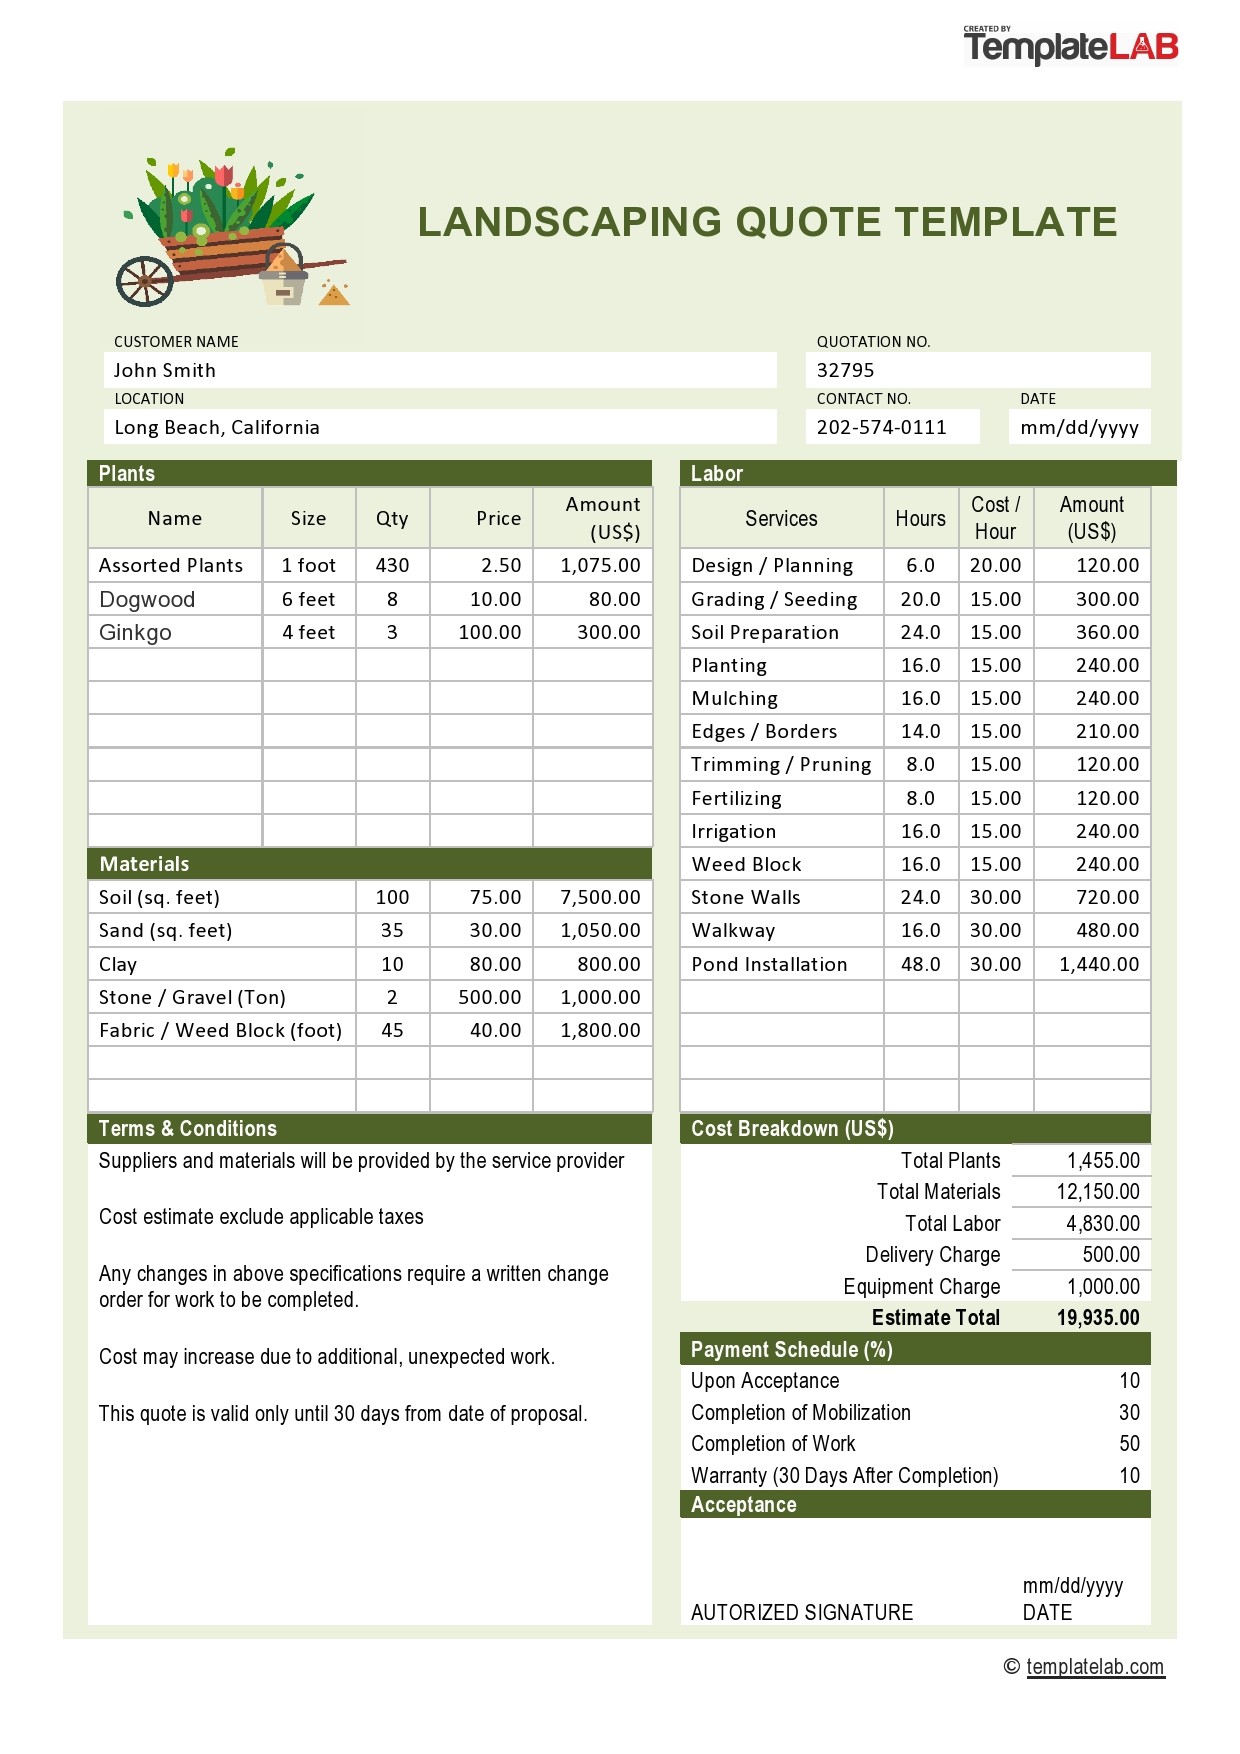 Landscaping Estimate Template Excel For Your Needs